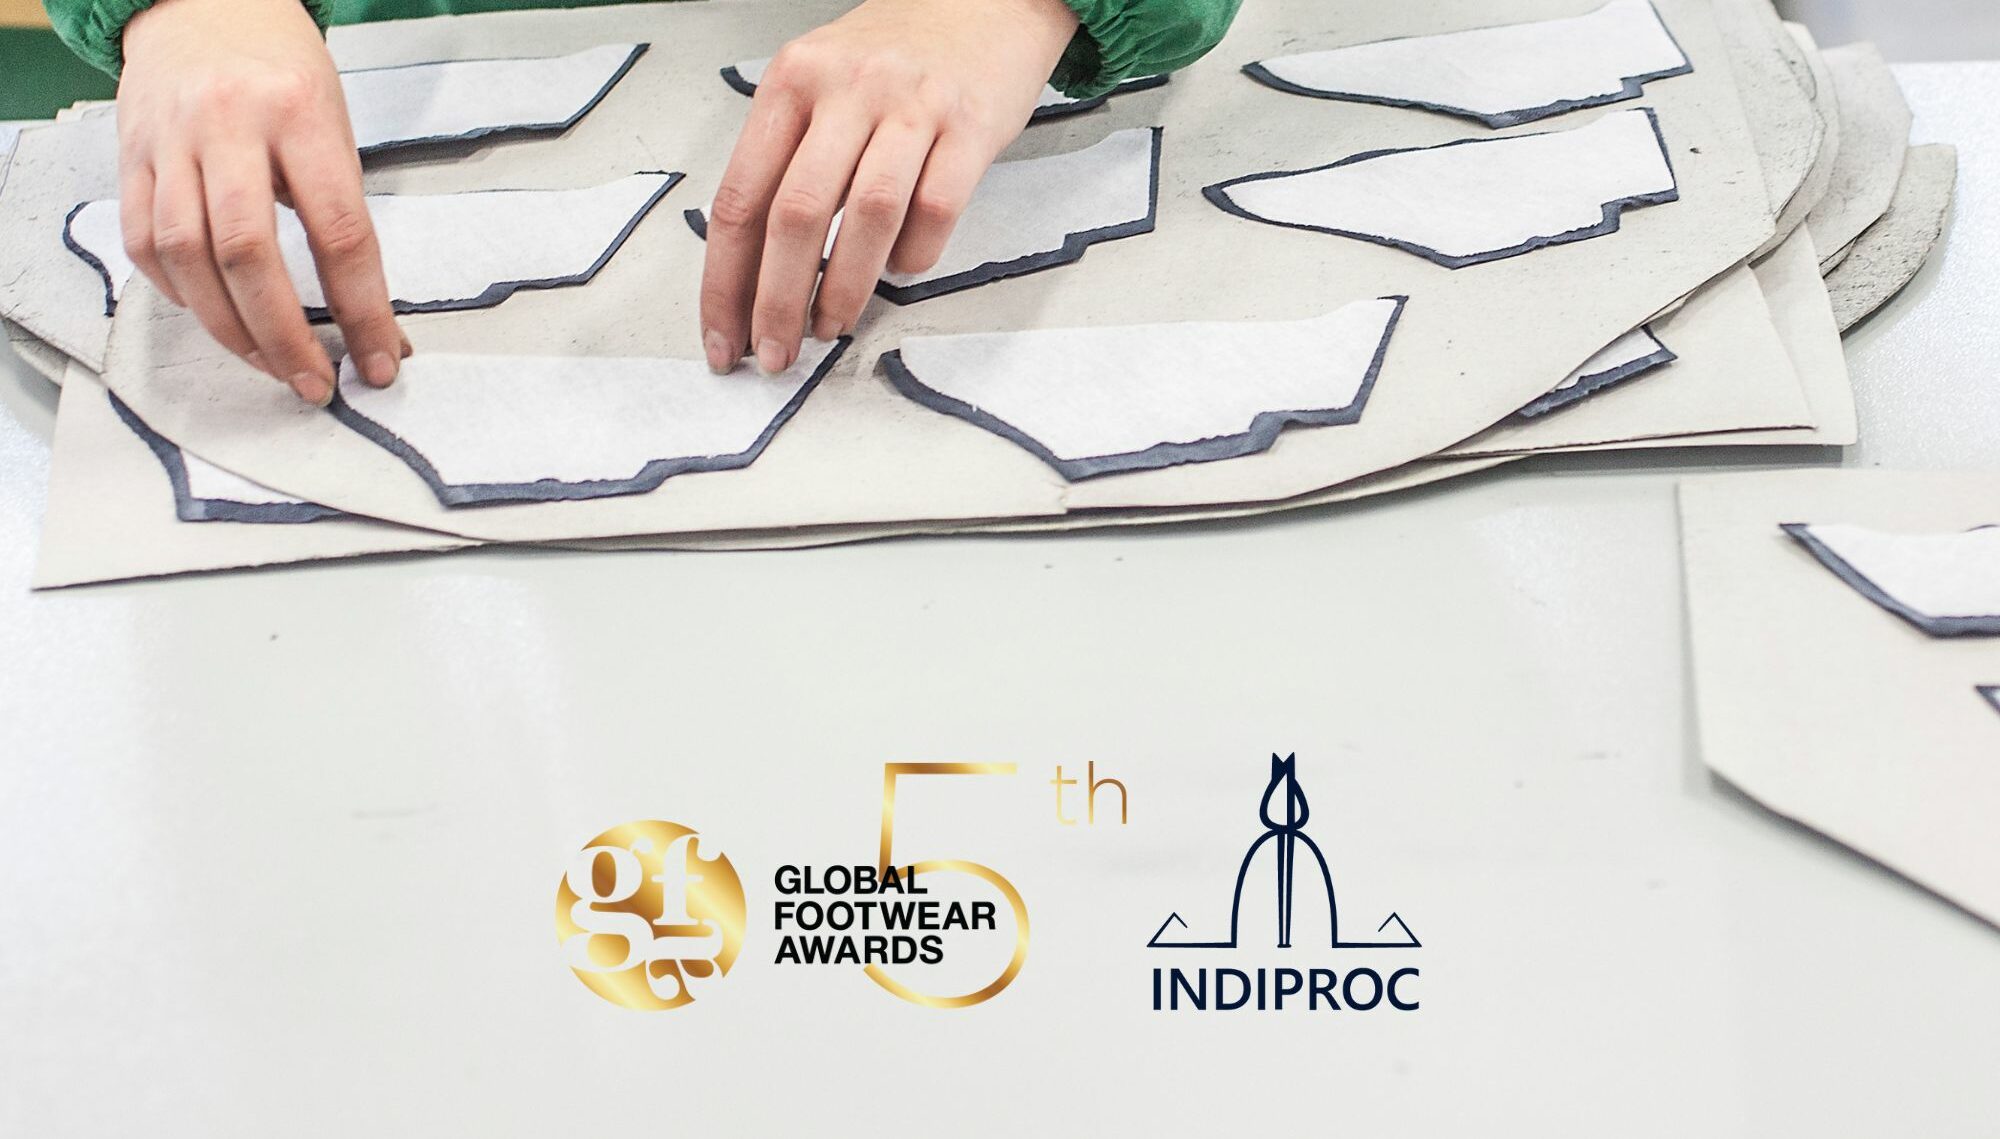 Global Footwear Awards Partner with INDIPROC to Empower Emerging Designers